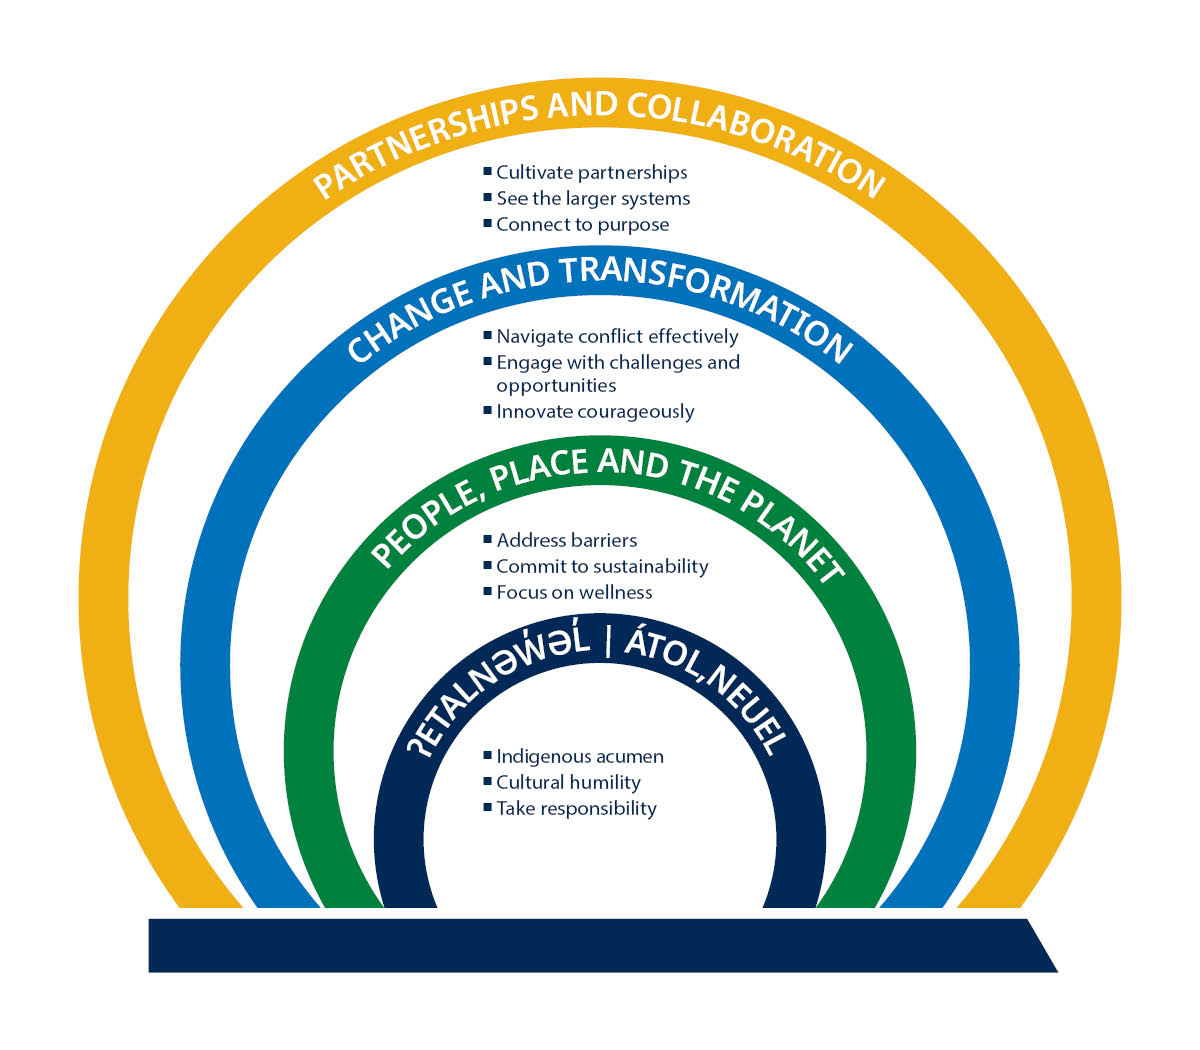 UVic Competency model